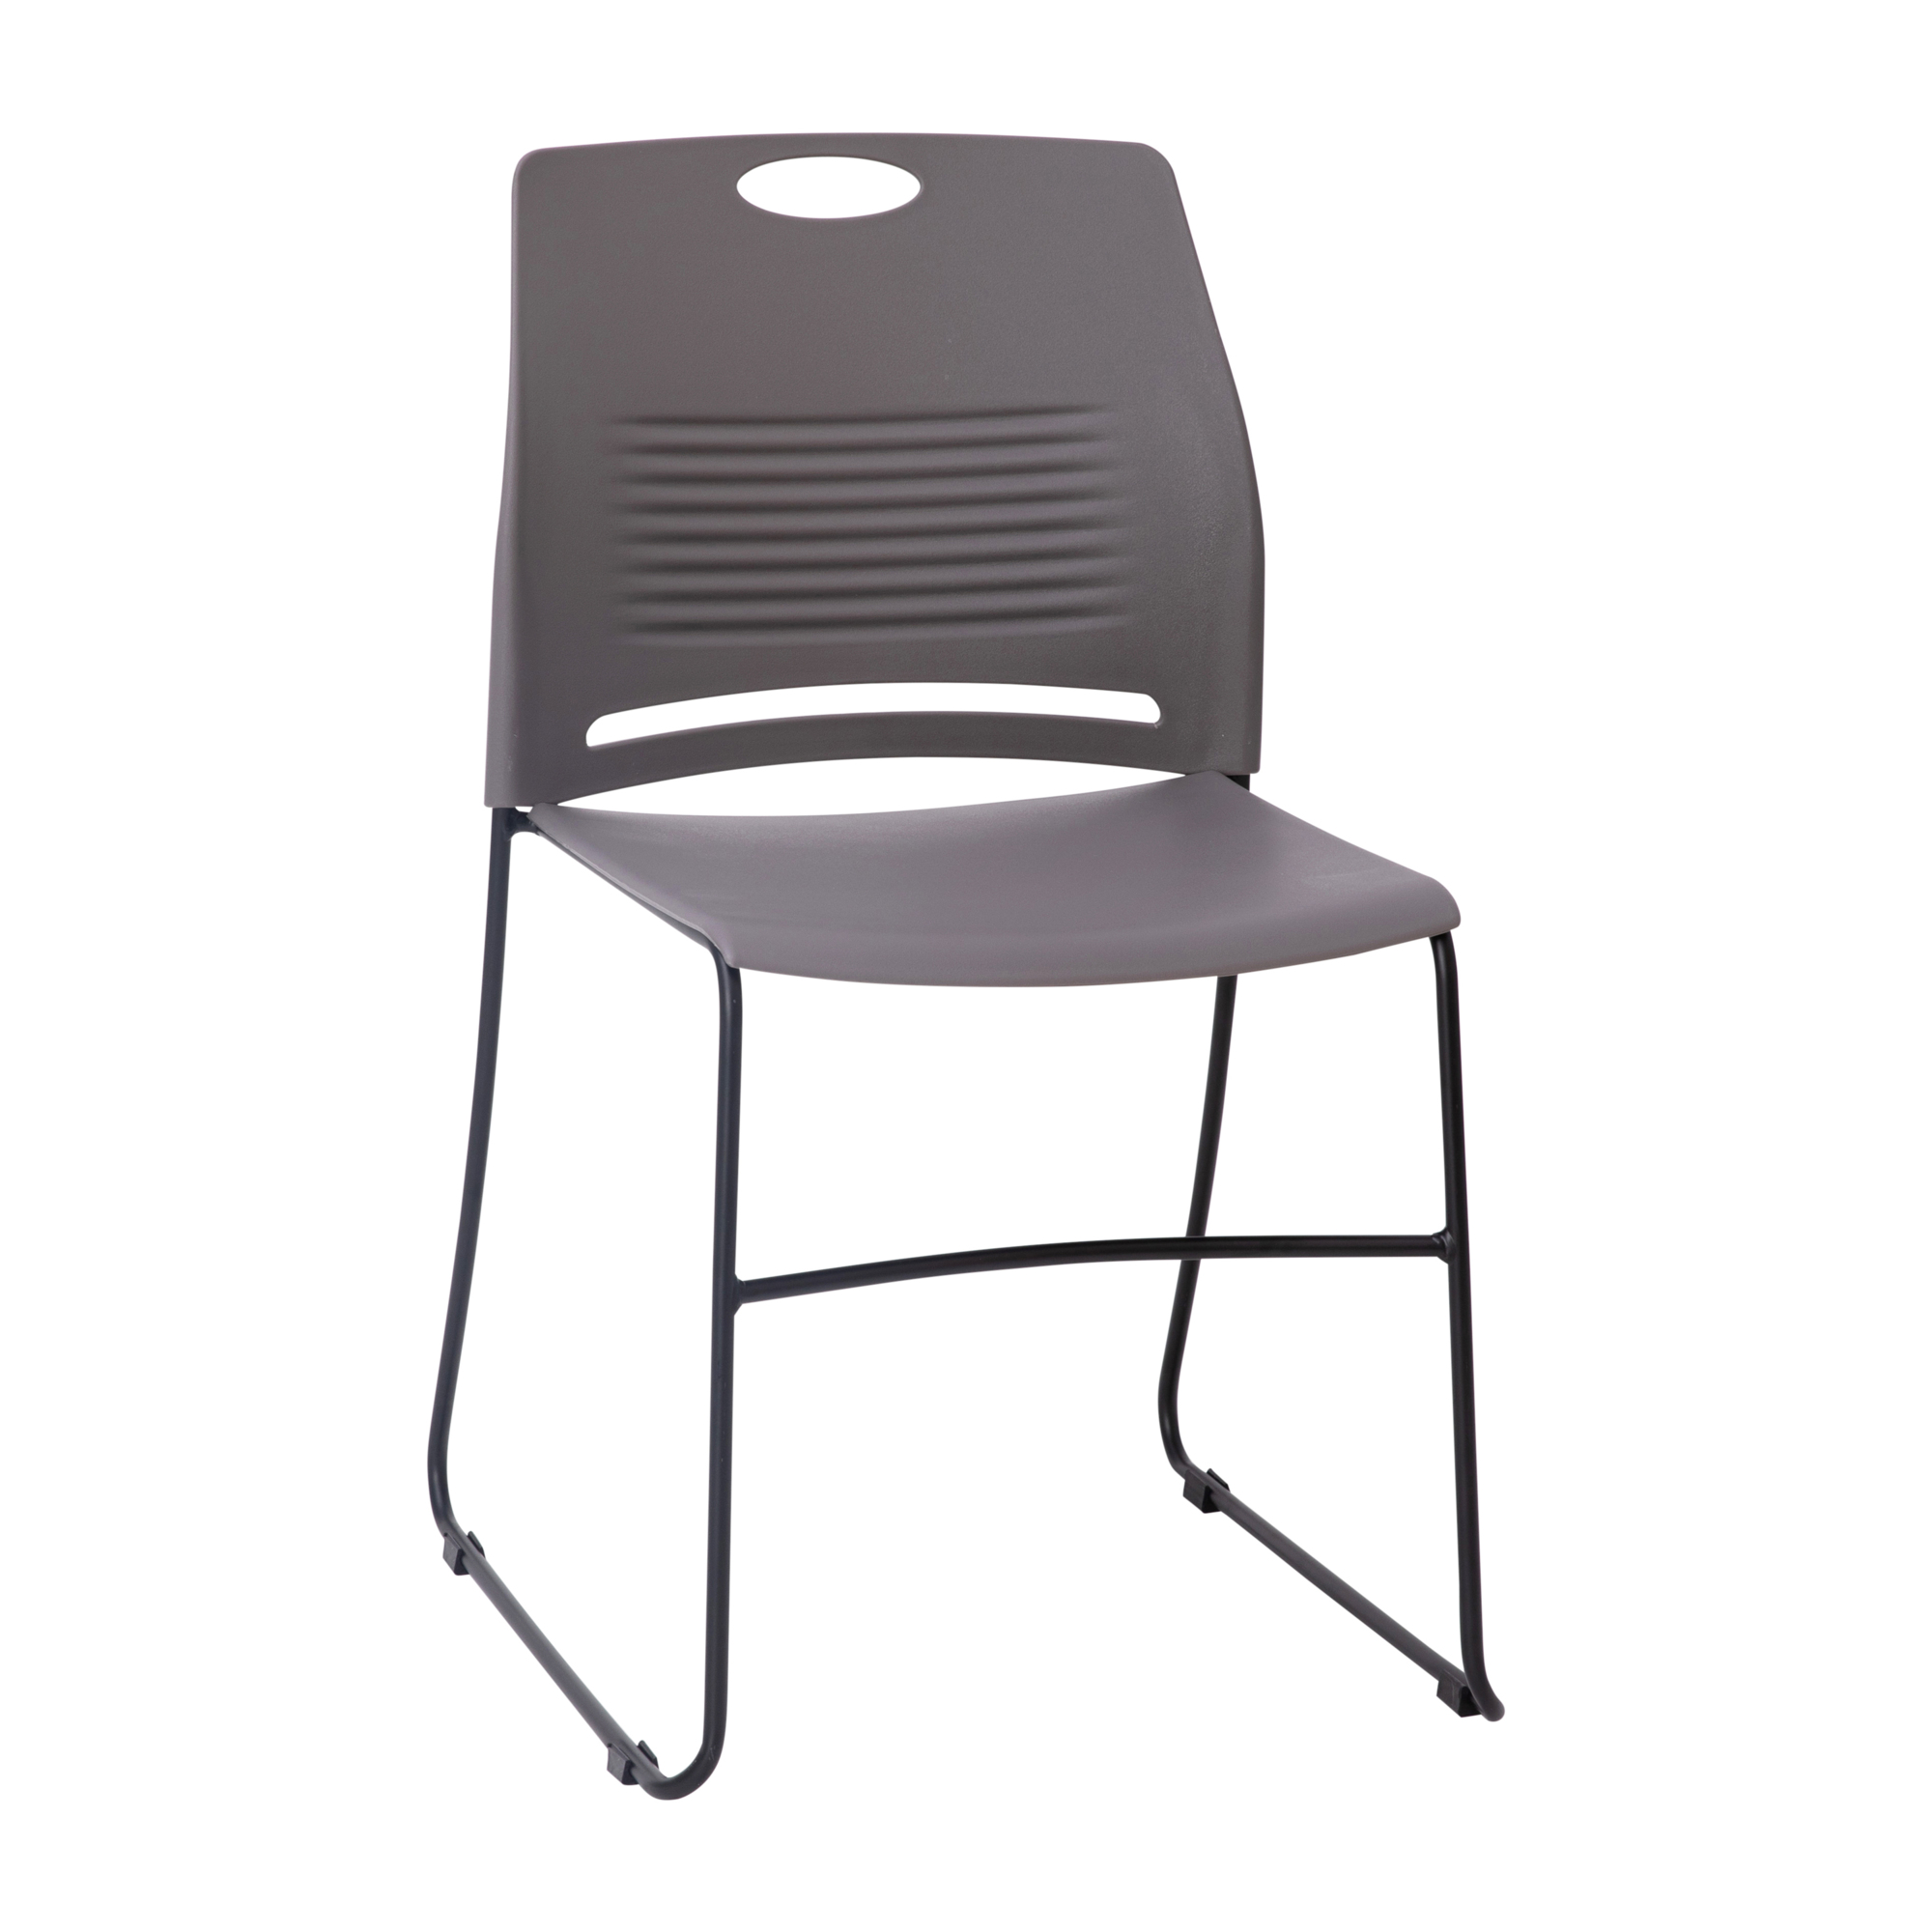 Flash Furniture, Gray Plastic Stack Chair with Steel Sled Base, Primary Color Gray, Included (qty.) 1, Model RUTNC499AGY